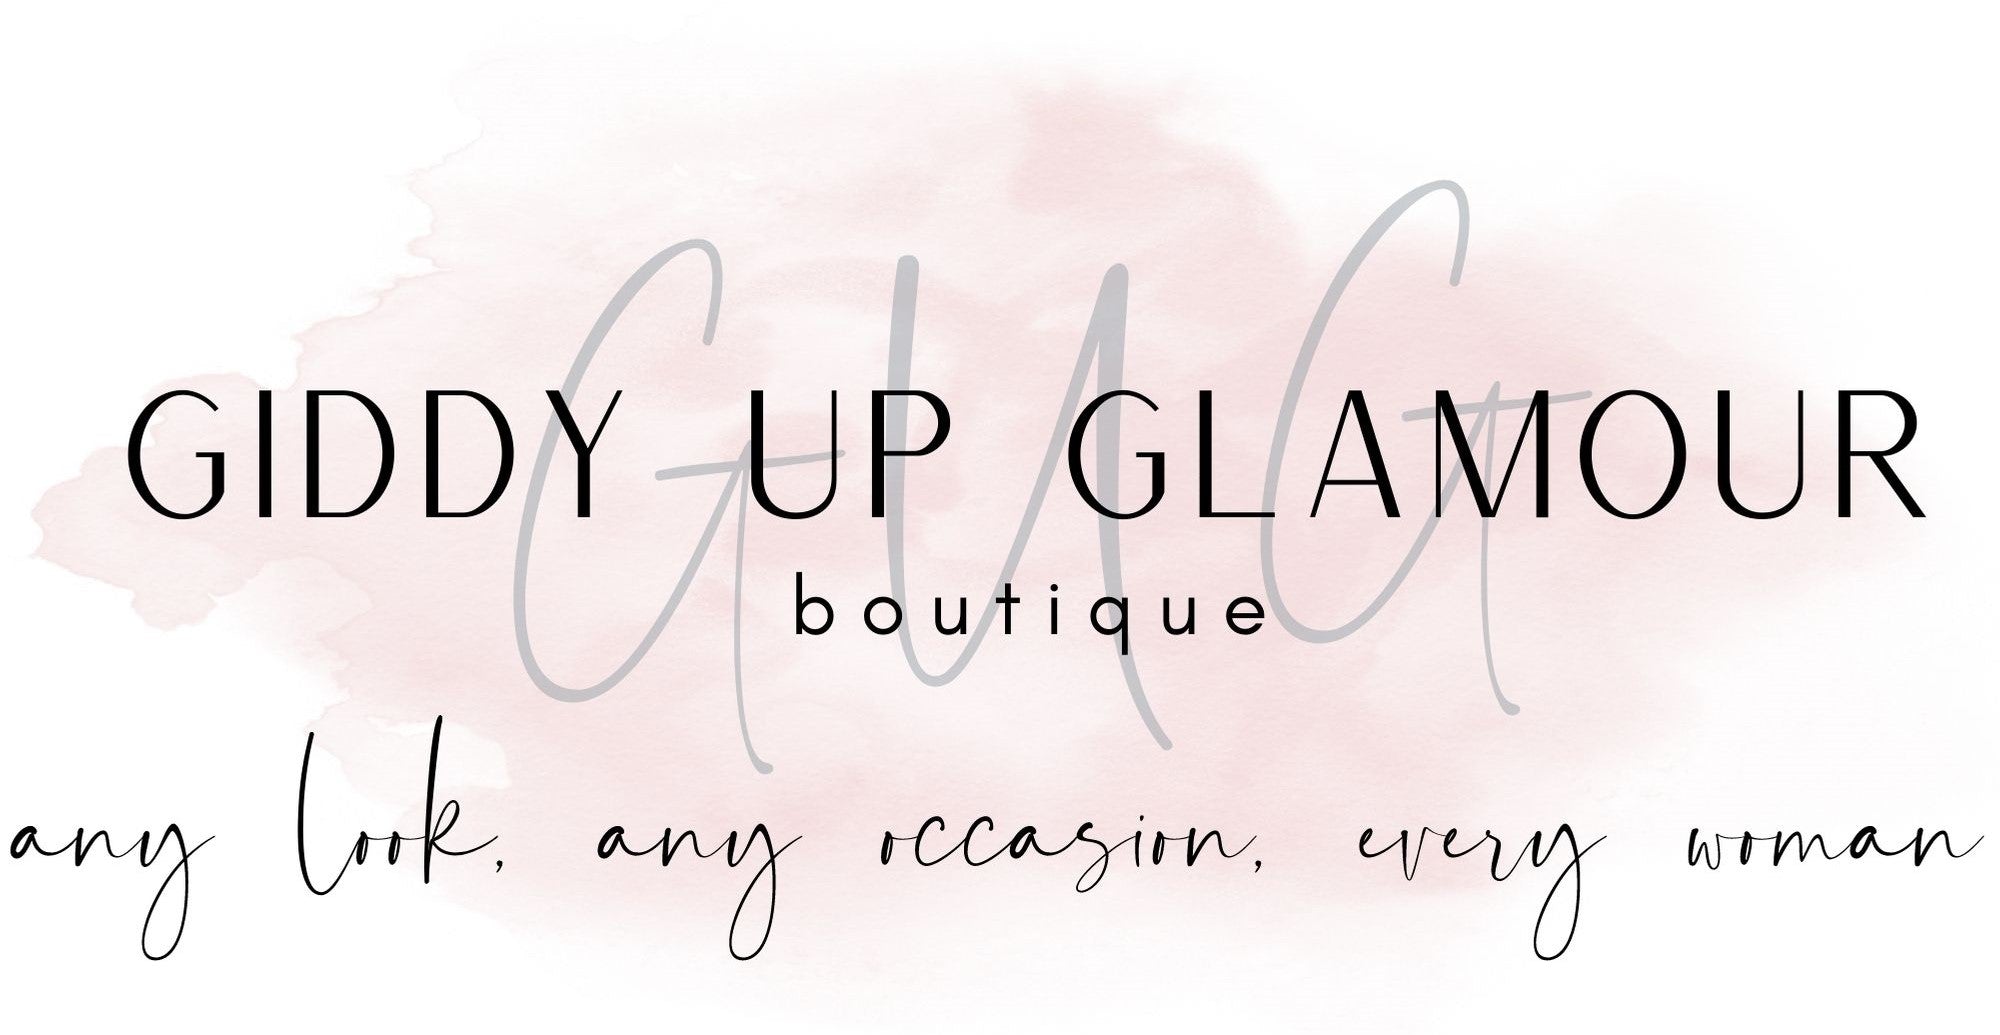 Giddy Up Glamour Boutique written over a light pink watercolor oval blob with the words "any look, any occasion, every woman" Written underneath.  Women run, family led, boutique in Texas with trendy clothes for all women including plus sizes. 